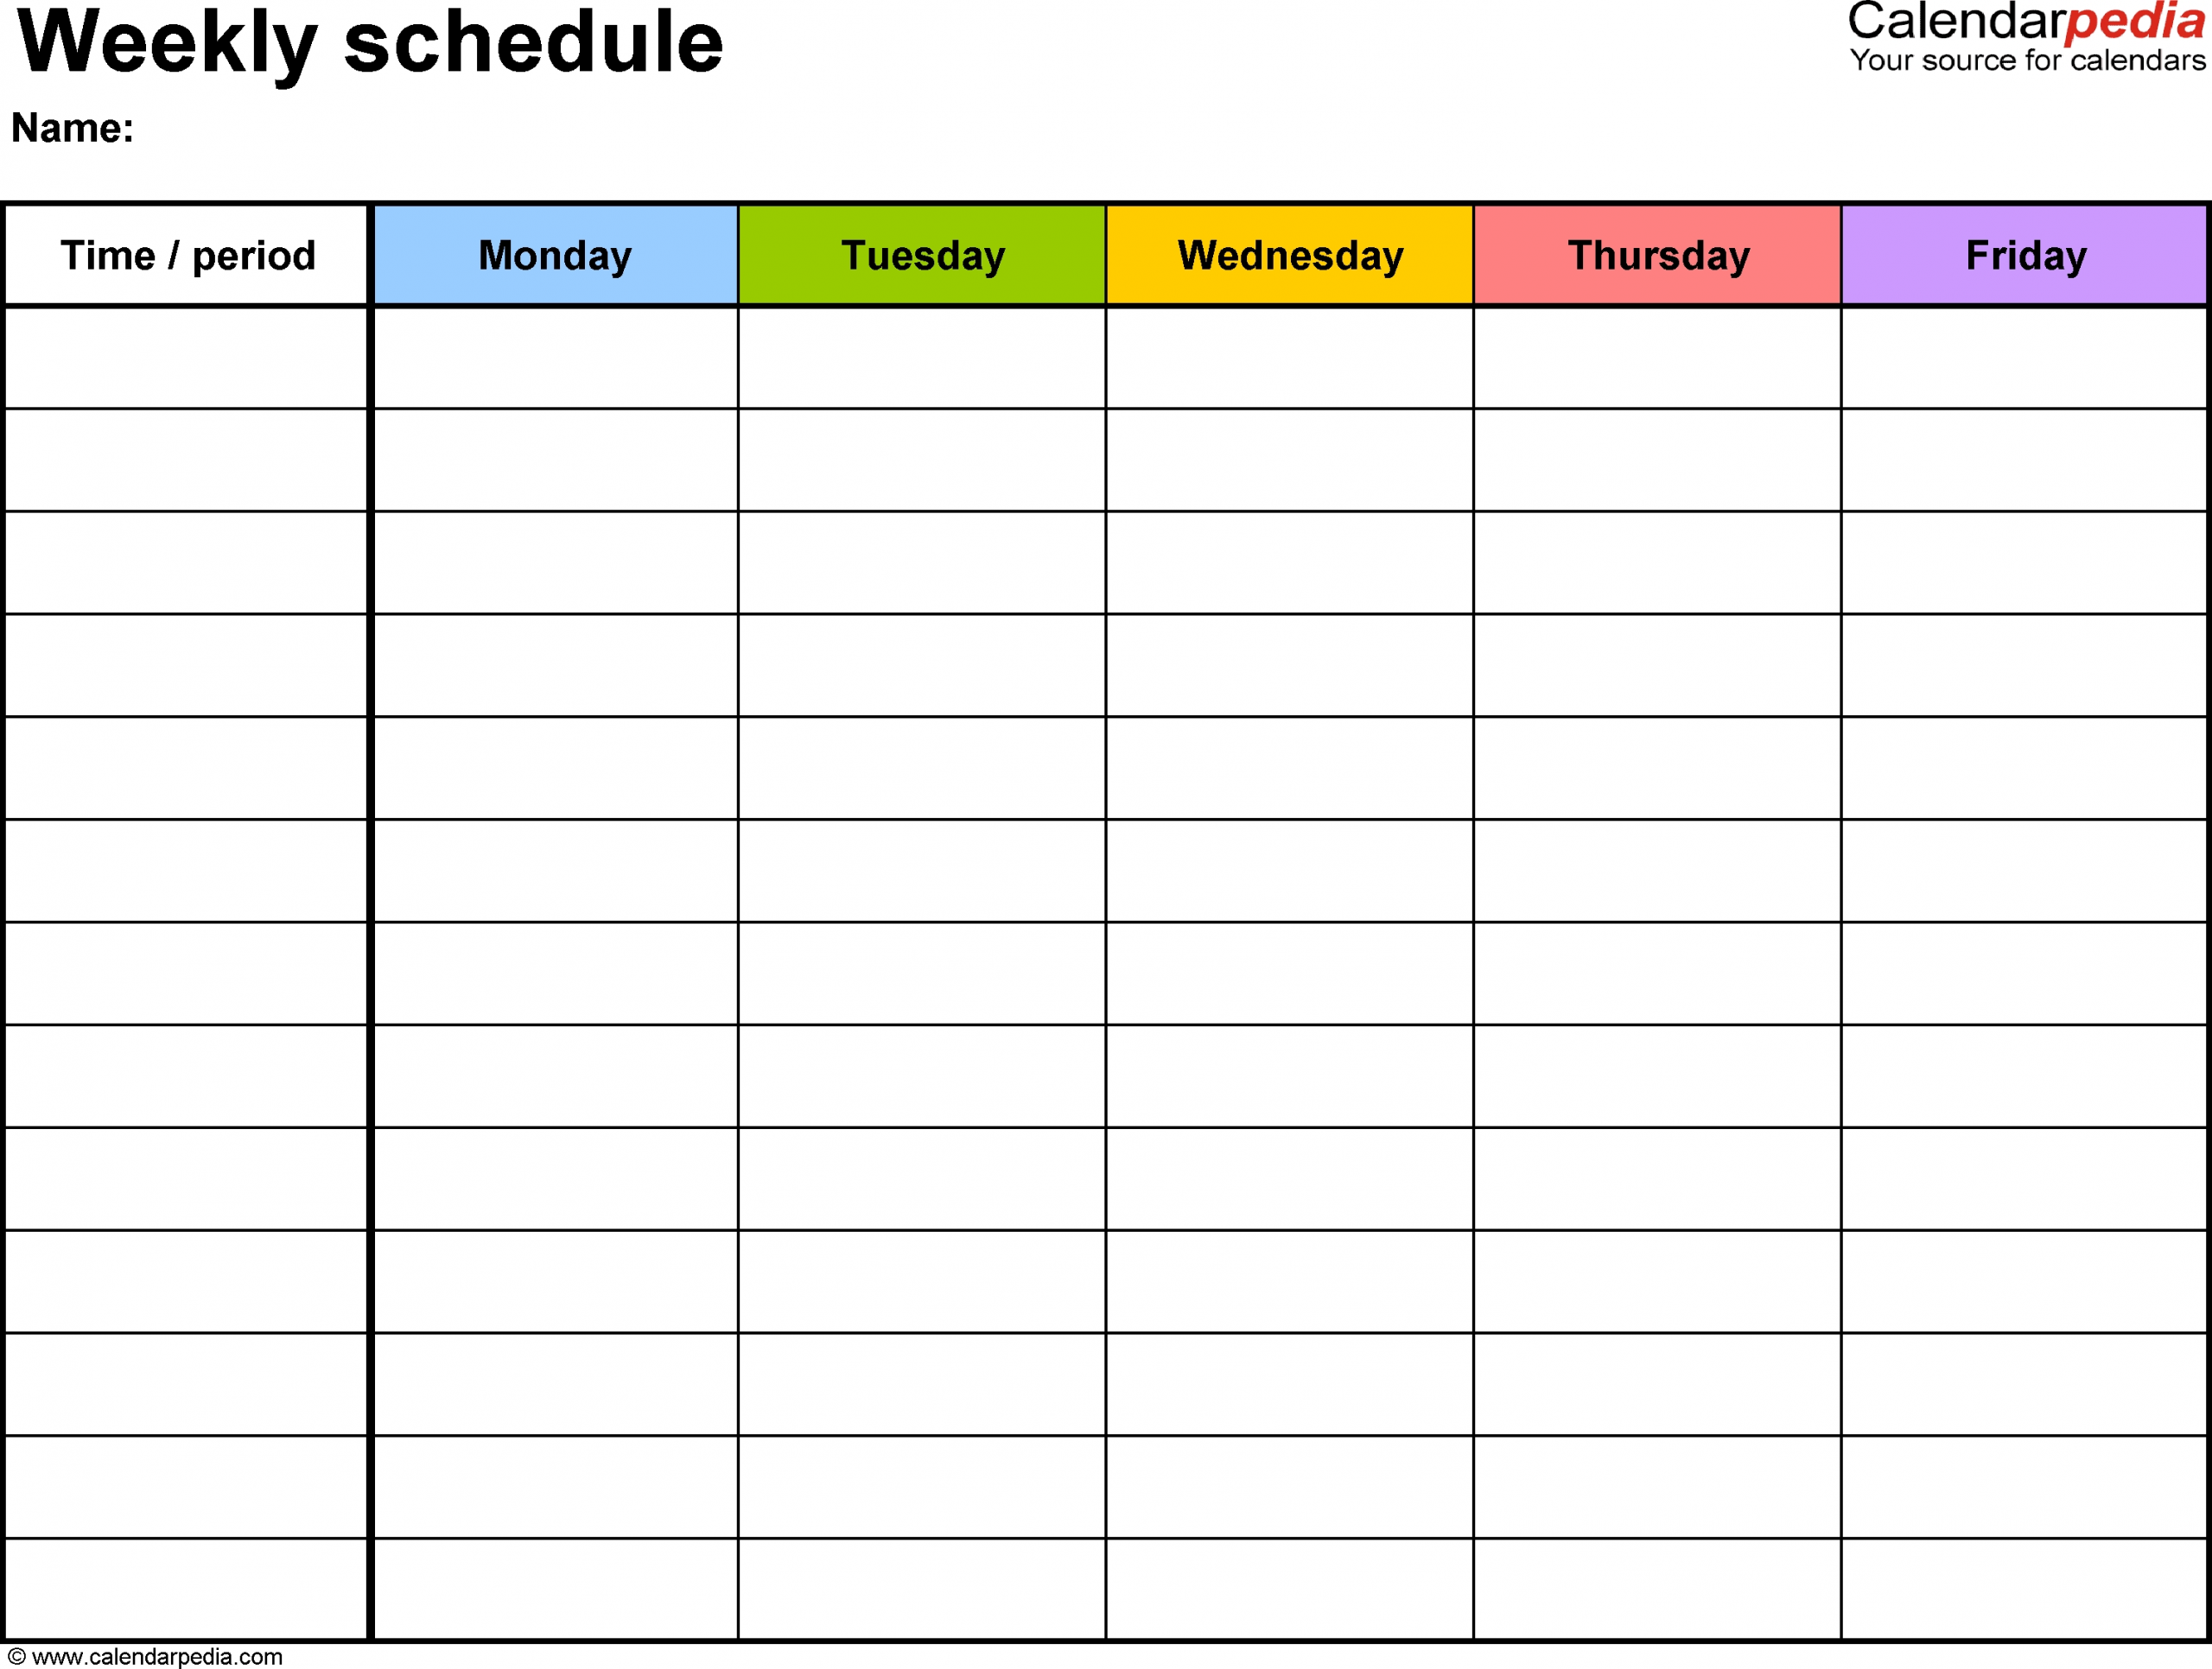 Free Weekly Schedule Templates For Word - 18 Templates 6 Week Calendar Template Word